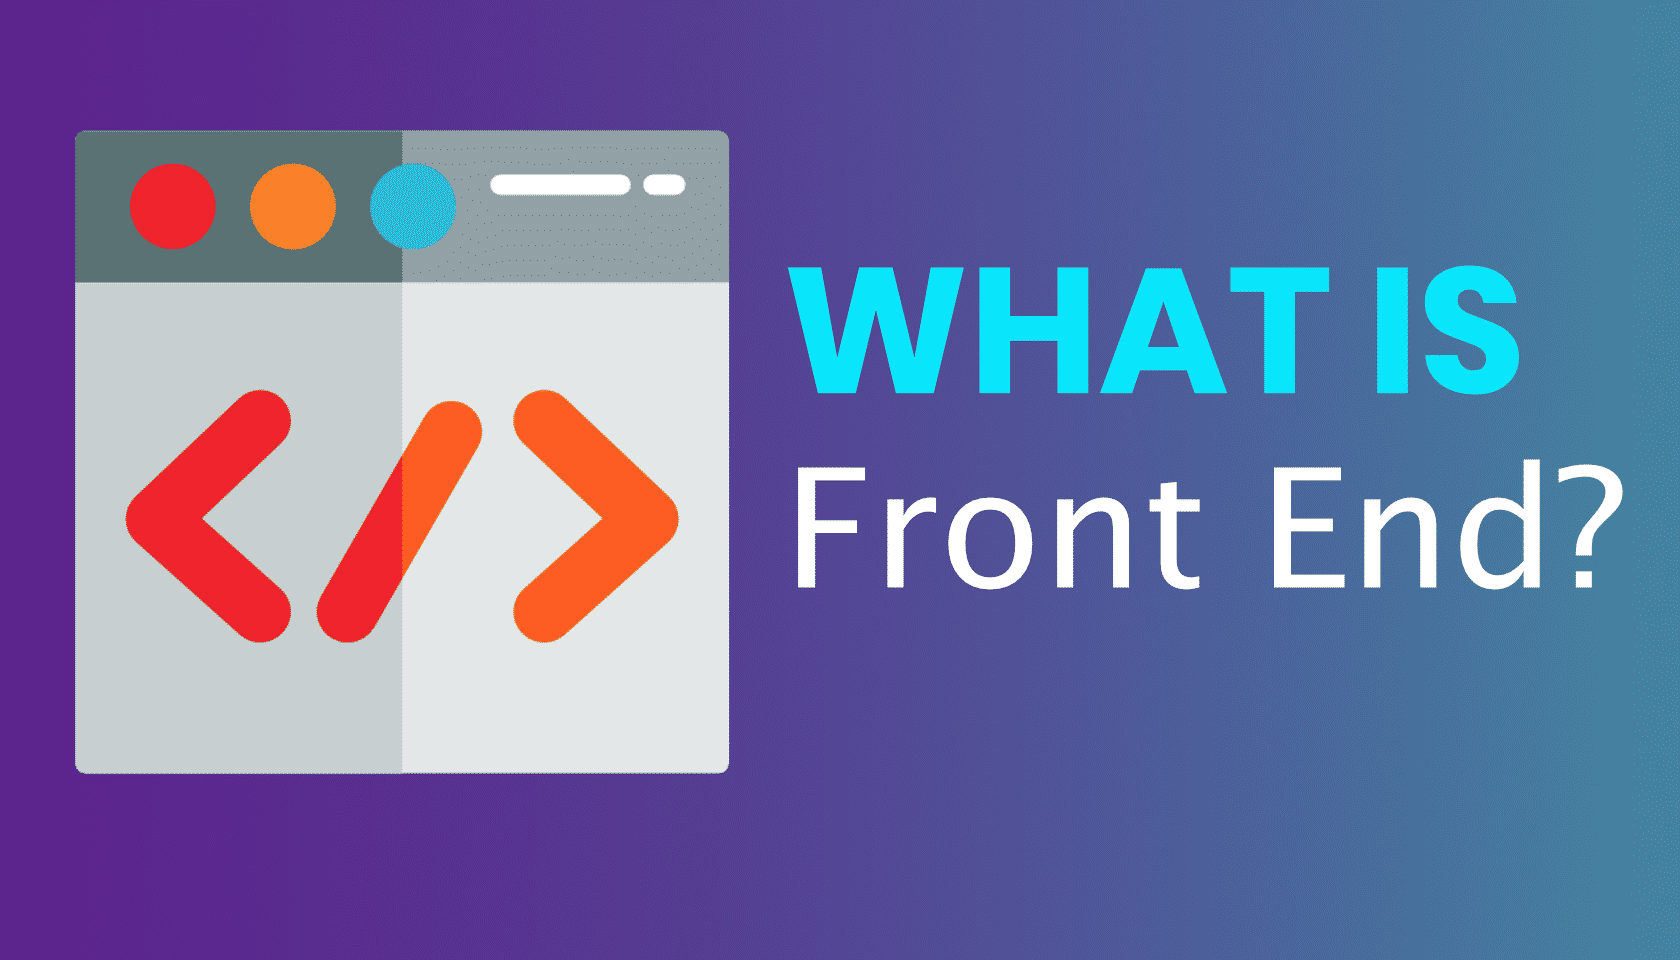 What is: WordPress Front End